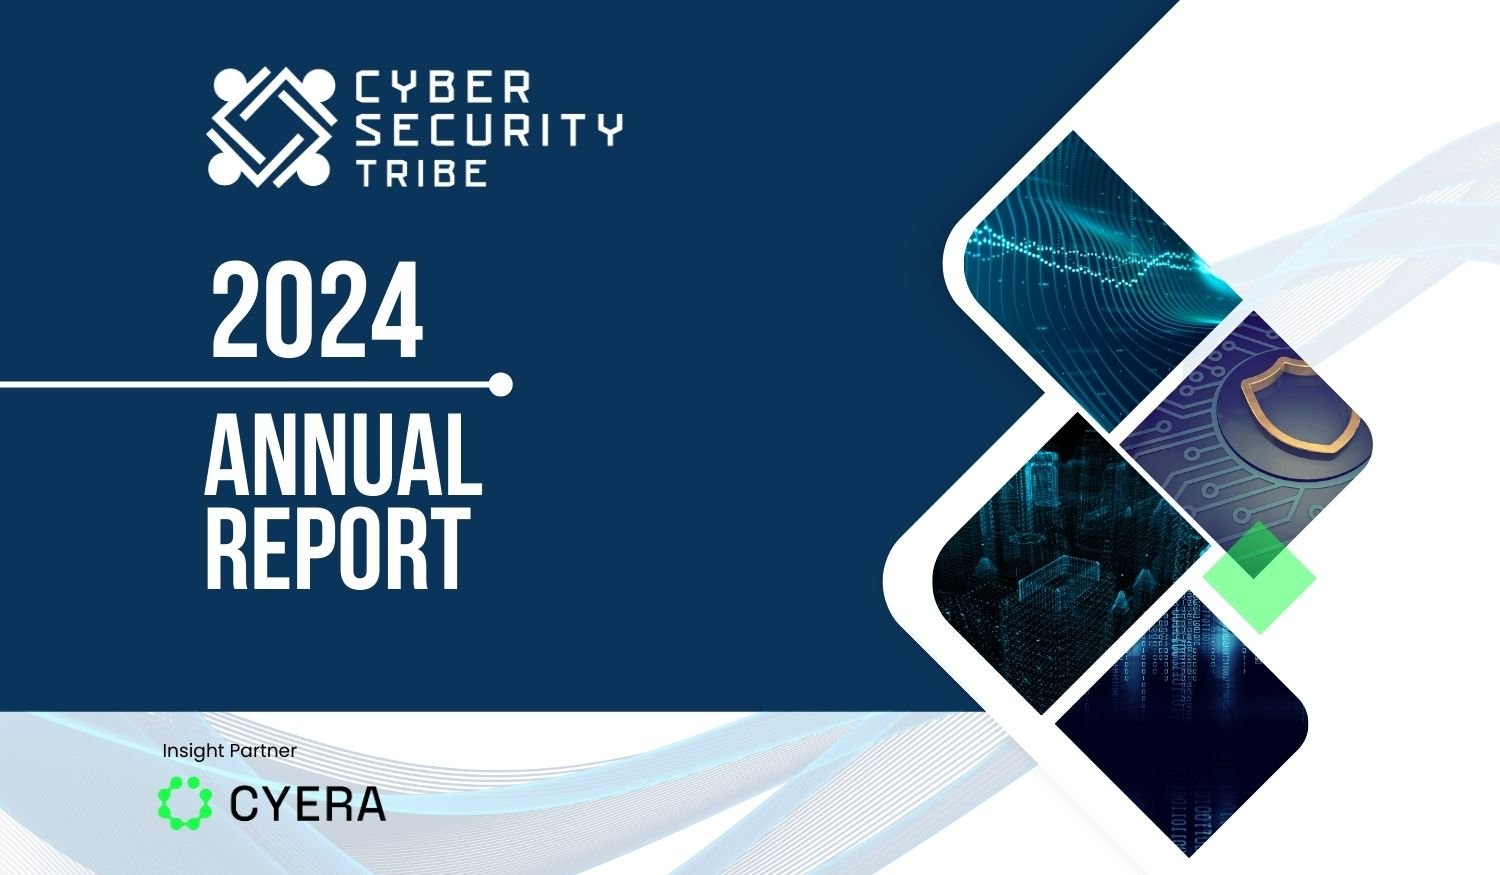 2024 Annual Report Thumbnail Cyber Security Tribe